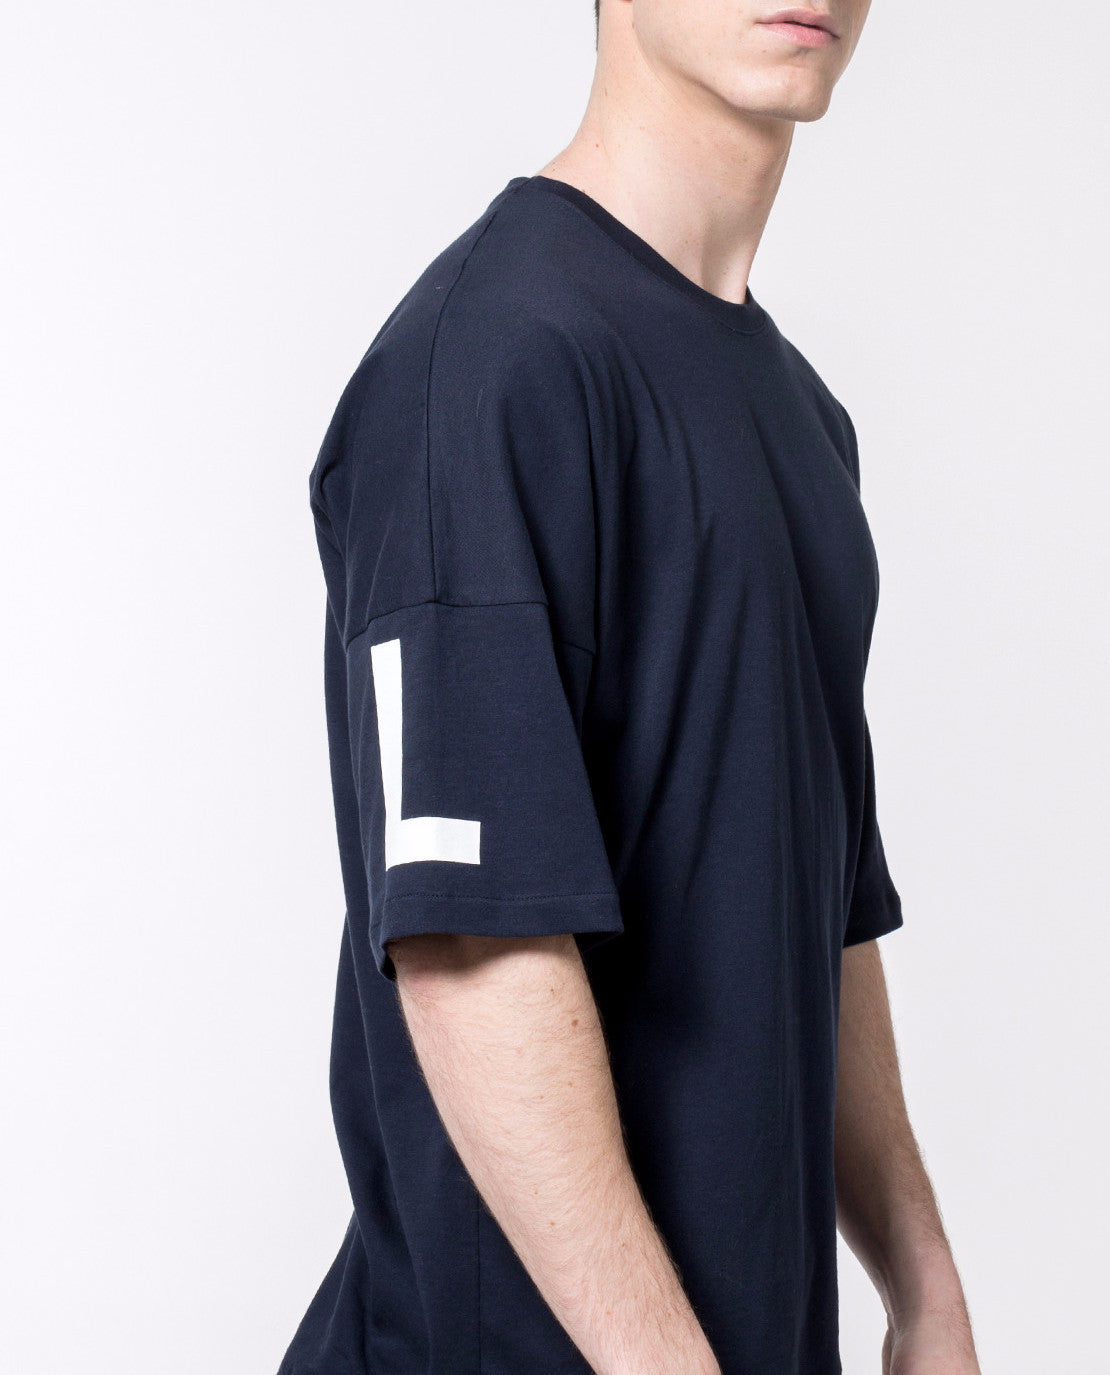 Boxy Fit Tee - Local Pattern